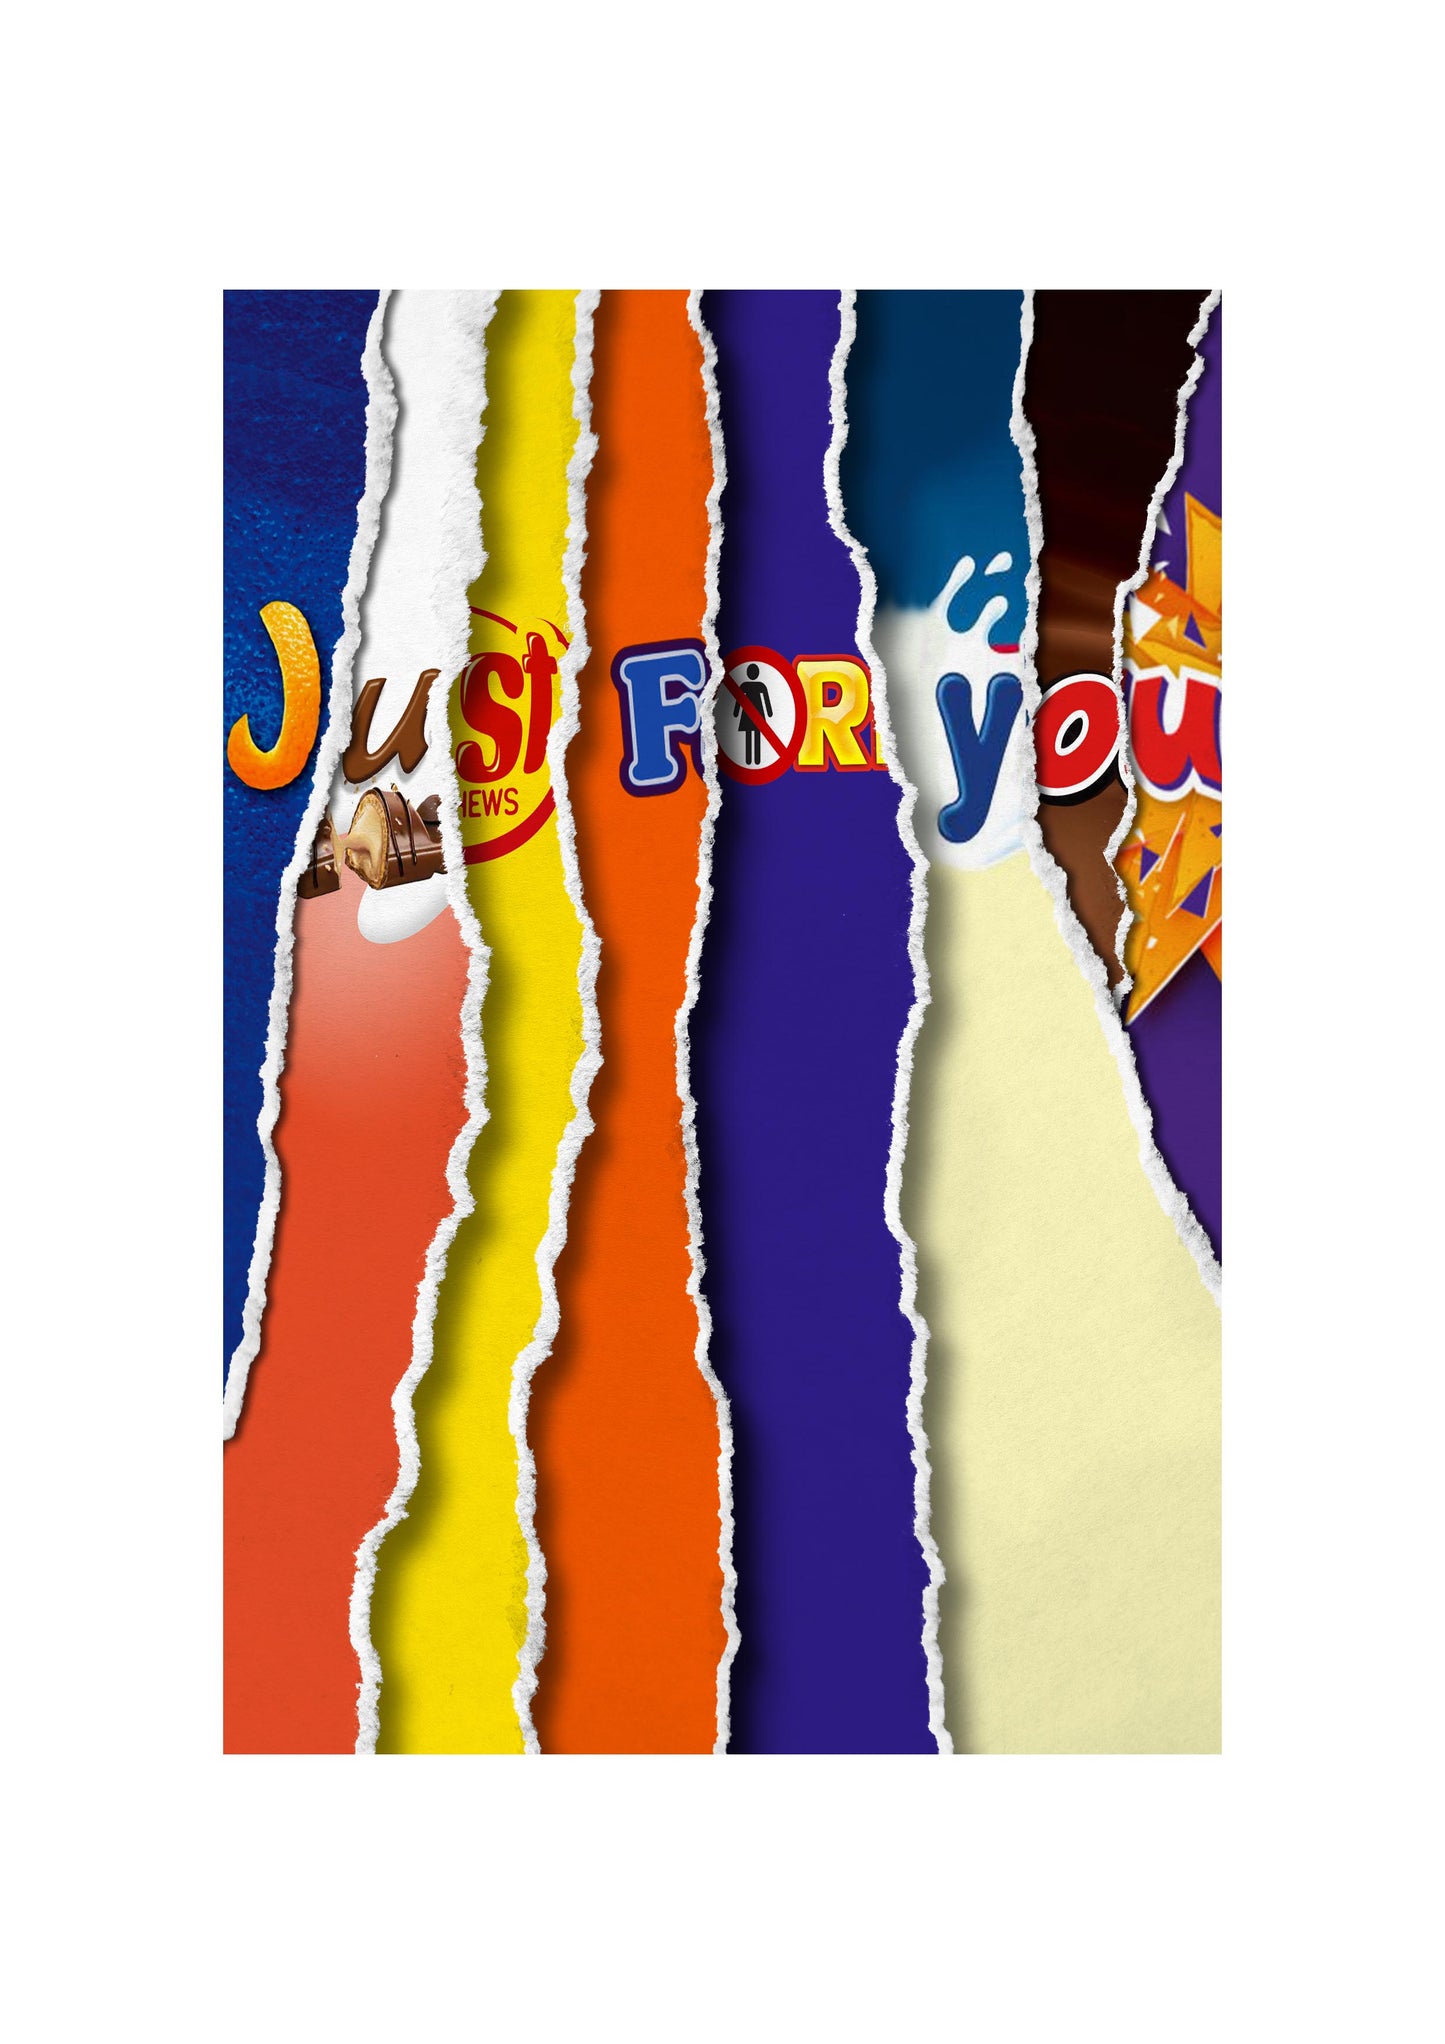 Galaxy Bar Wrappers - "S", "T", "U", "V" Selection